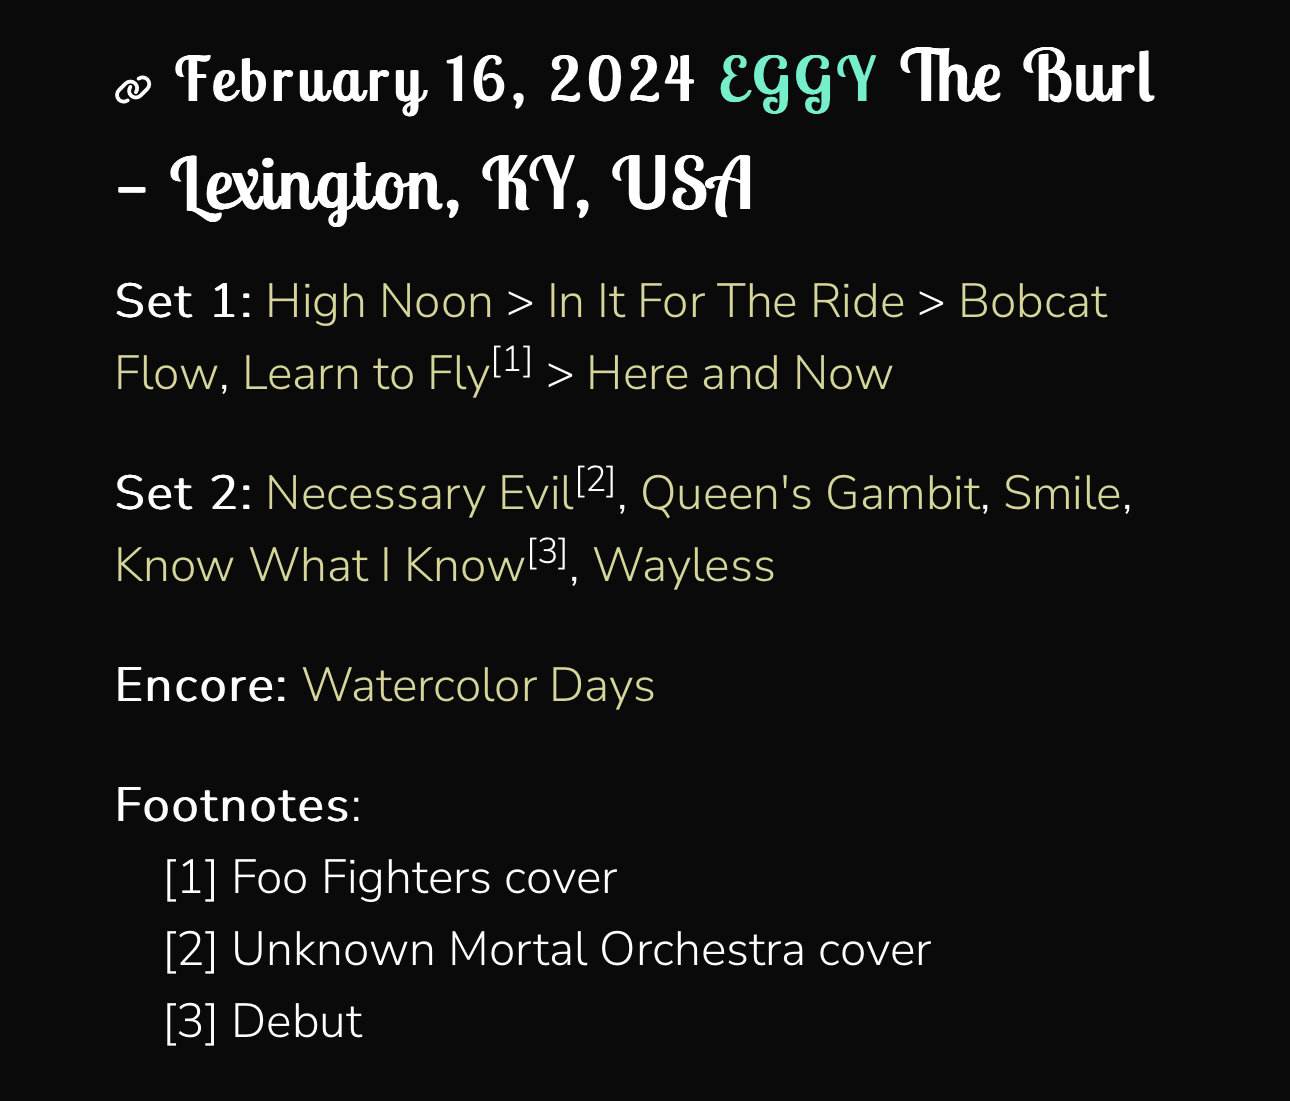 February 16, 2024 EgGY The Burl- lexington, KY, UStSet 1: High Noon > In It For The Ride > Bobcat Flow, Learn to Flyll! > Here and NowSet 2: Necessary Evil2, Queen’s Gambit, Smile, Know What I Know 31, WaylessEncore: Watercolor DaysFootnotes:[1] Foo Fighters cover[2] Unknown Mortal Orchestra cover[3] Debut